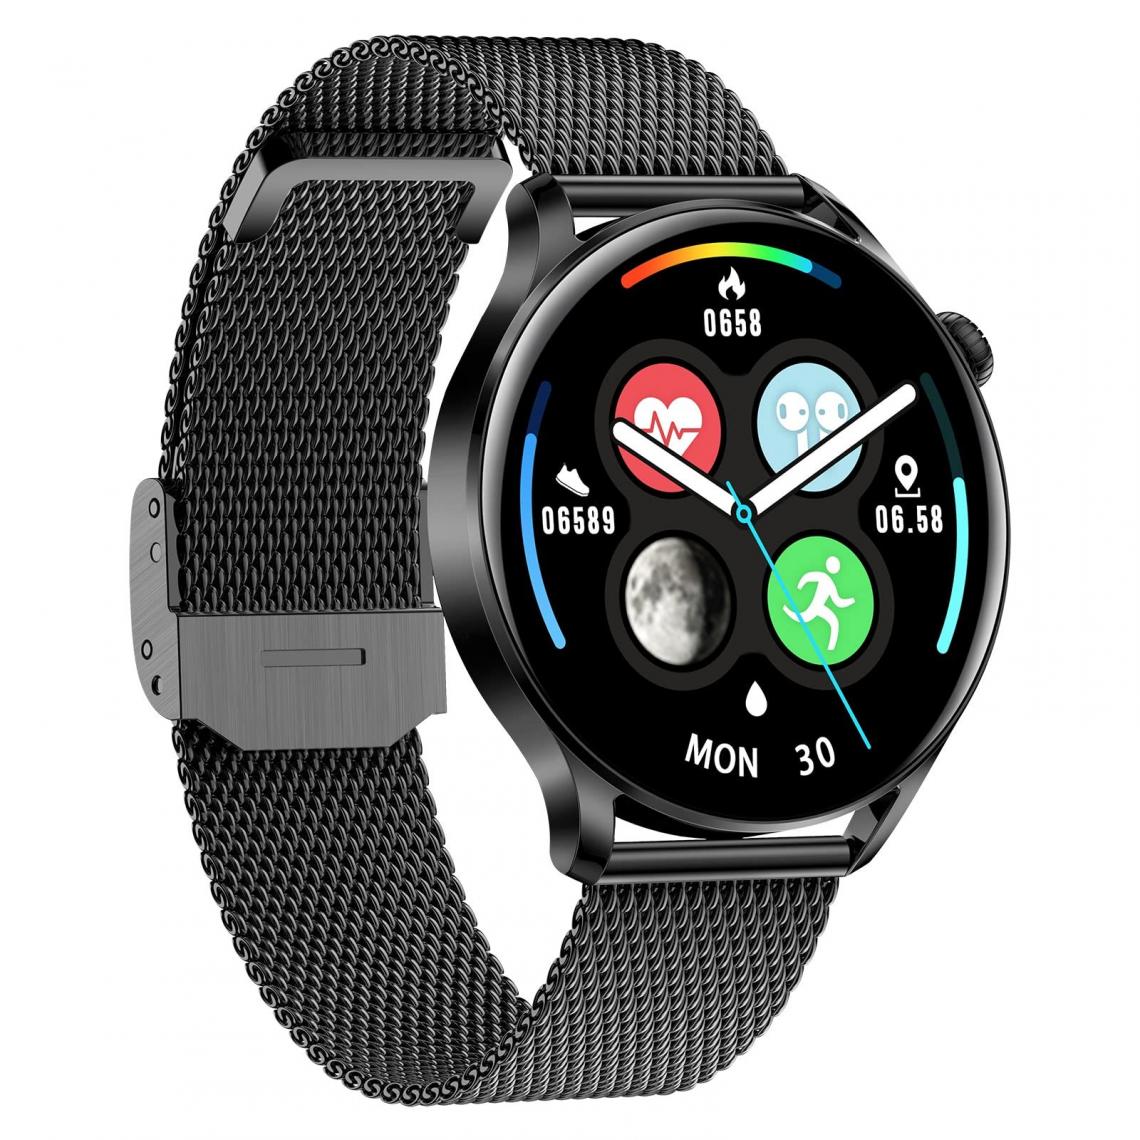 Chronotech Montres - Chronus Smart Watch for Android Phones Ios, Fitness Tracker Watch with Bluetooth Call Music Player IP67 Waterproof Smart Watch Pedometer Calories for Women Men Smartwatch(black) - Montre connectée